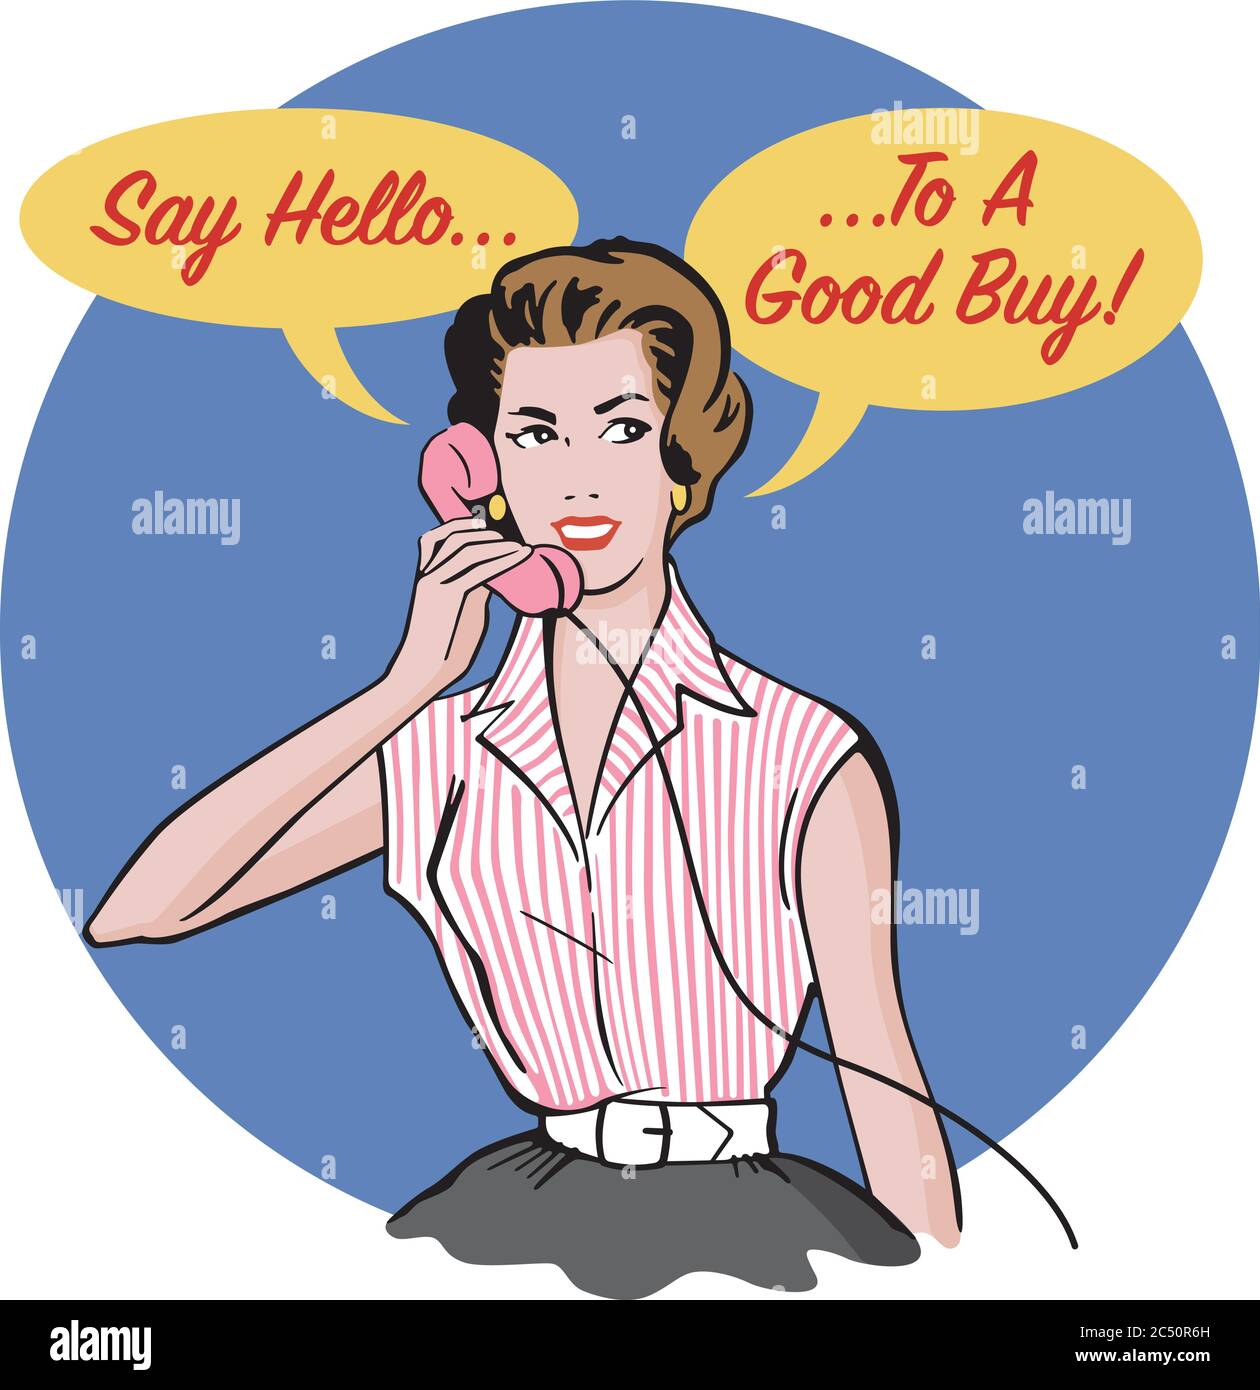 Vintage style advertising badge. Retro woman talking on phone with Say Hello To A Good Buy marketing slogan. Stock Vector